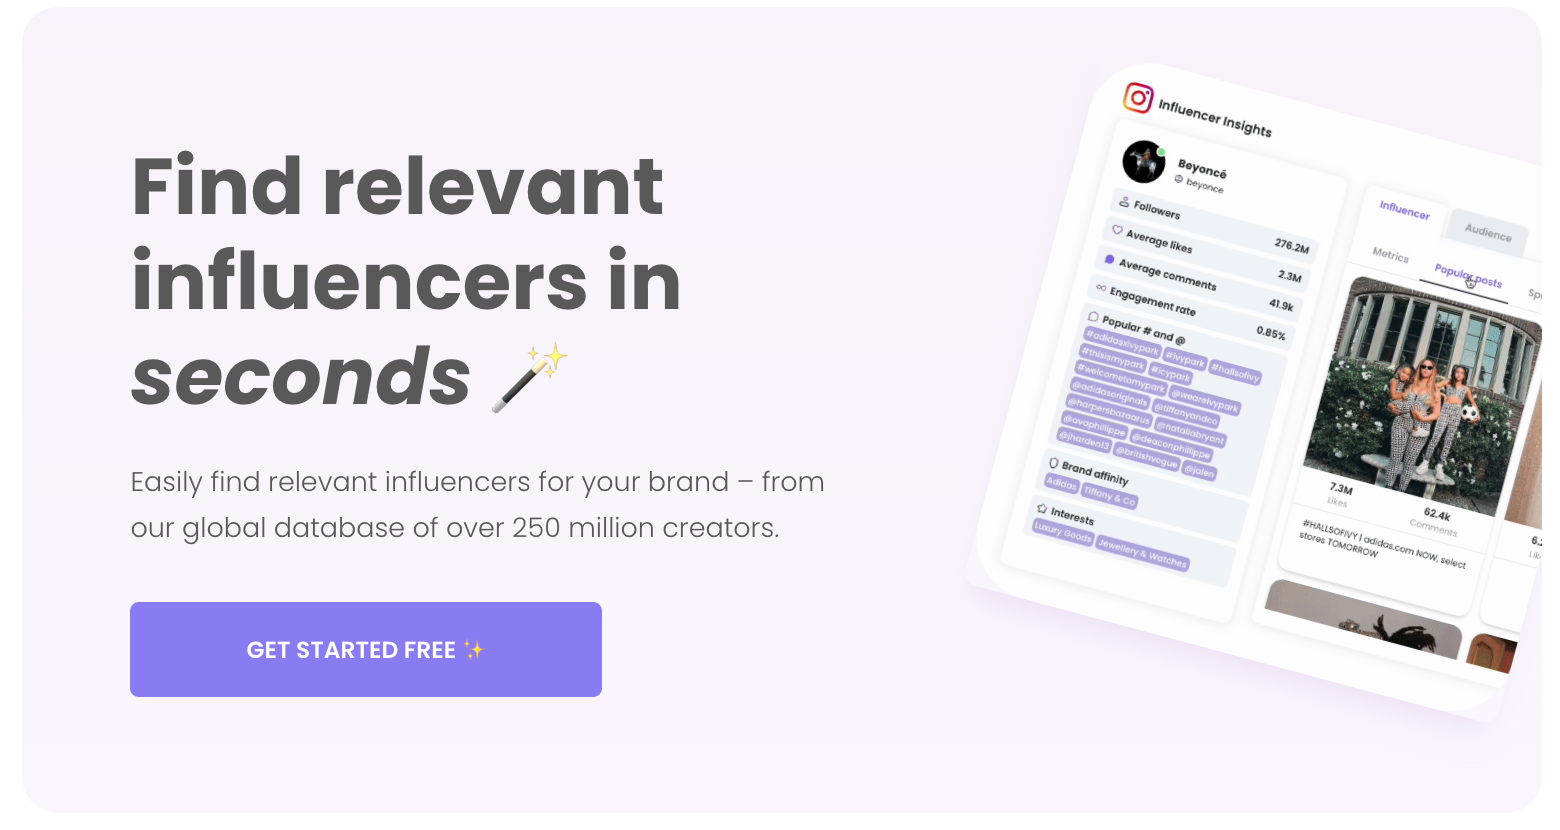 Using our influencer search, you can find relevant influencers in seconds